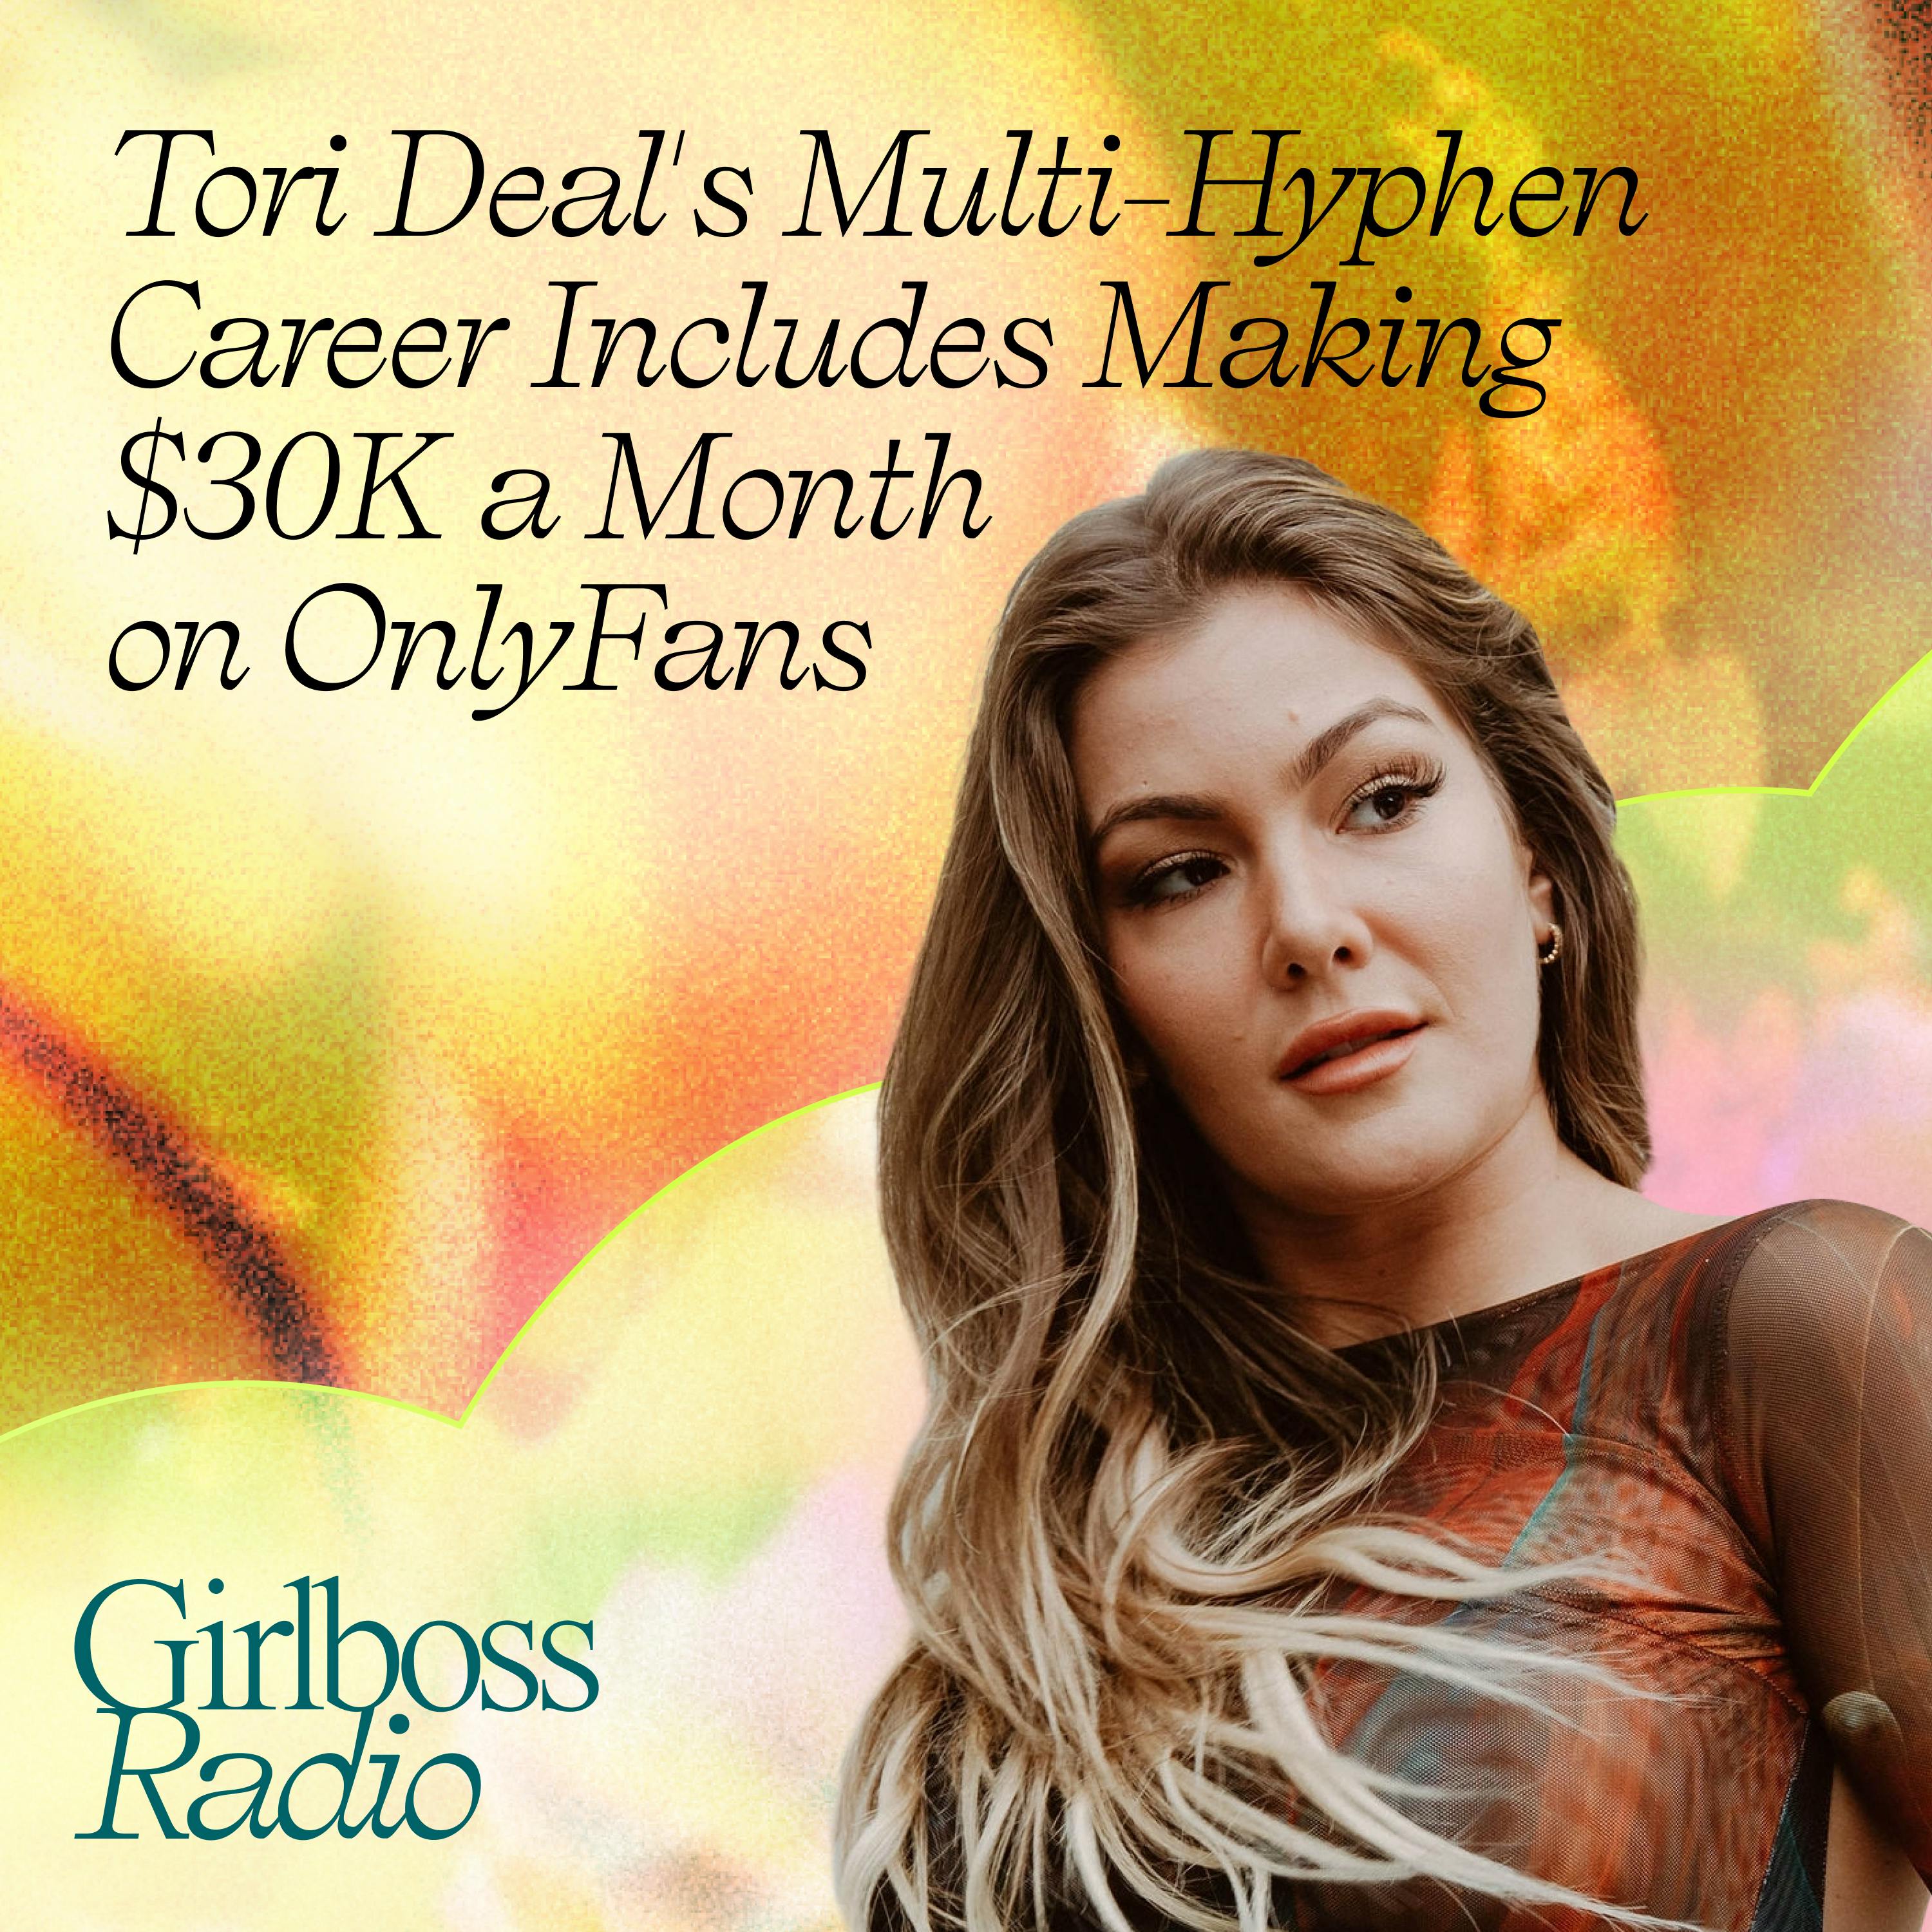 Tori Deal's Multi-Hyphenate Career Includes Making $30K a Month on OnlyFans